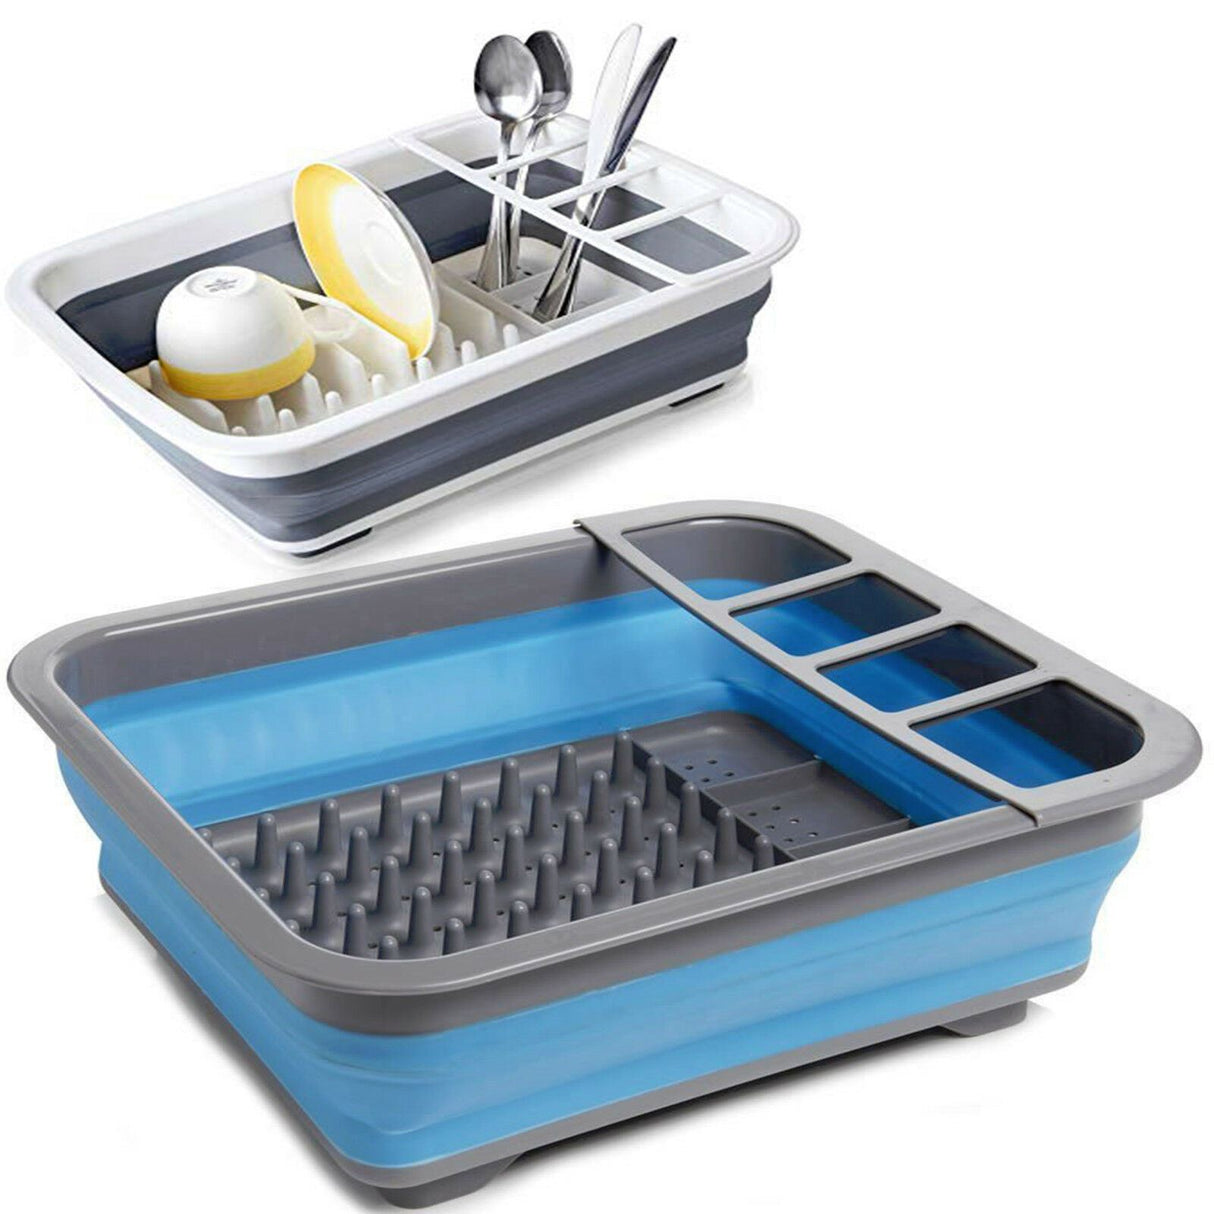 Collapsible Dish Drainer by Ultra Clean - UKBuyZone